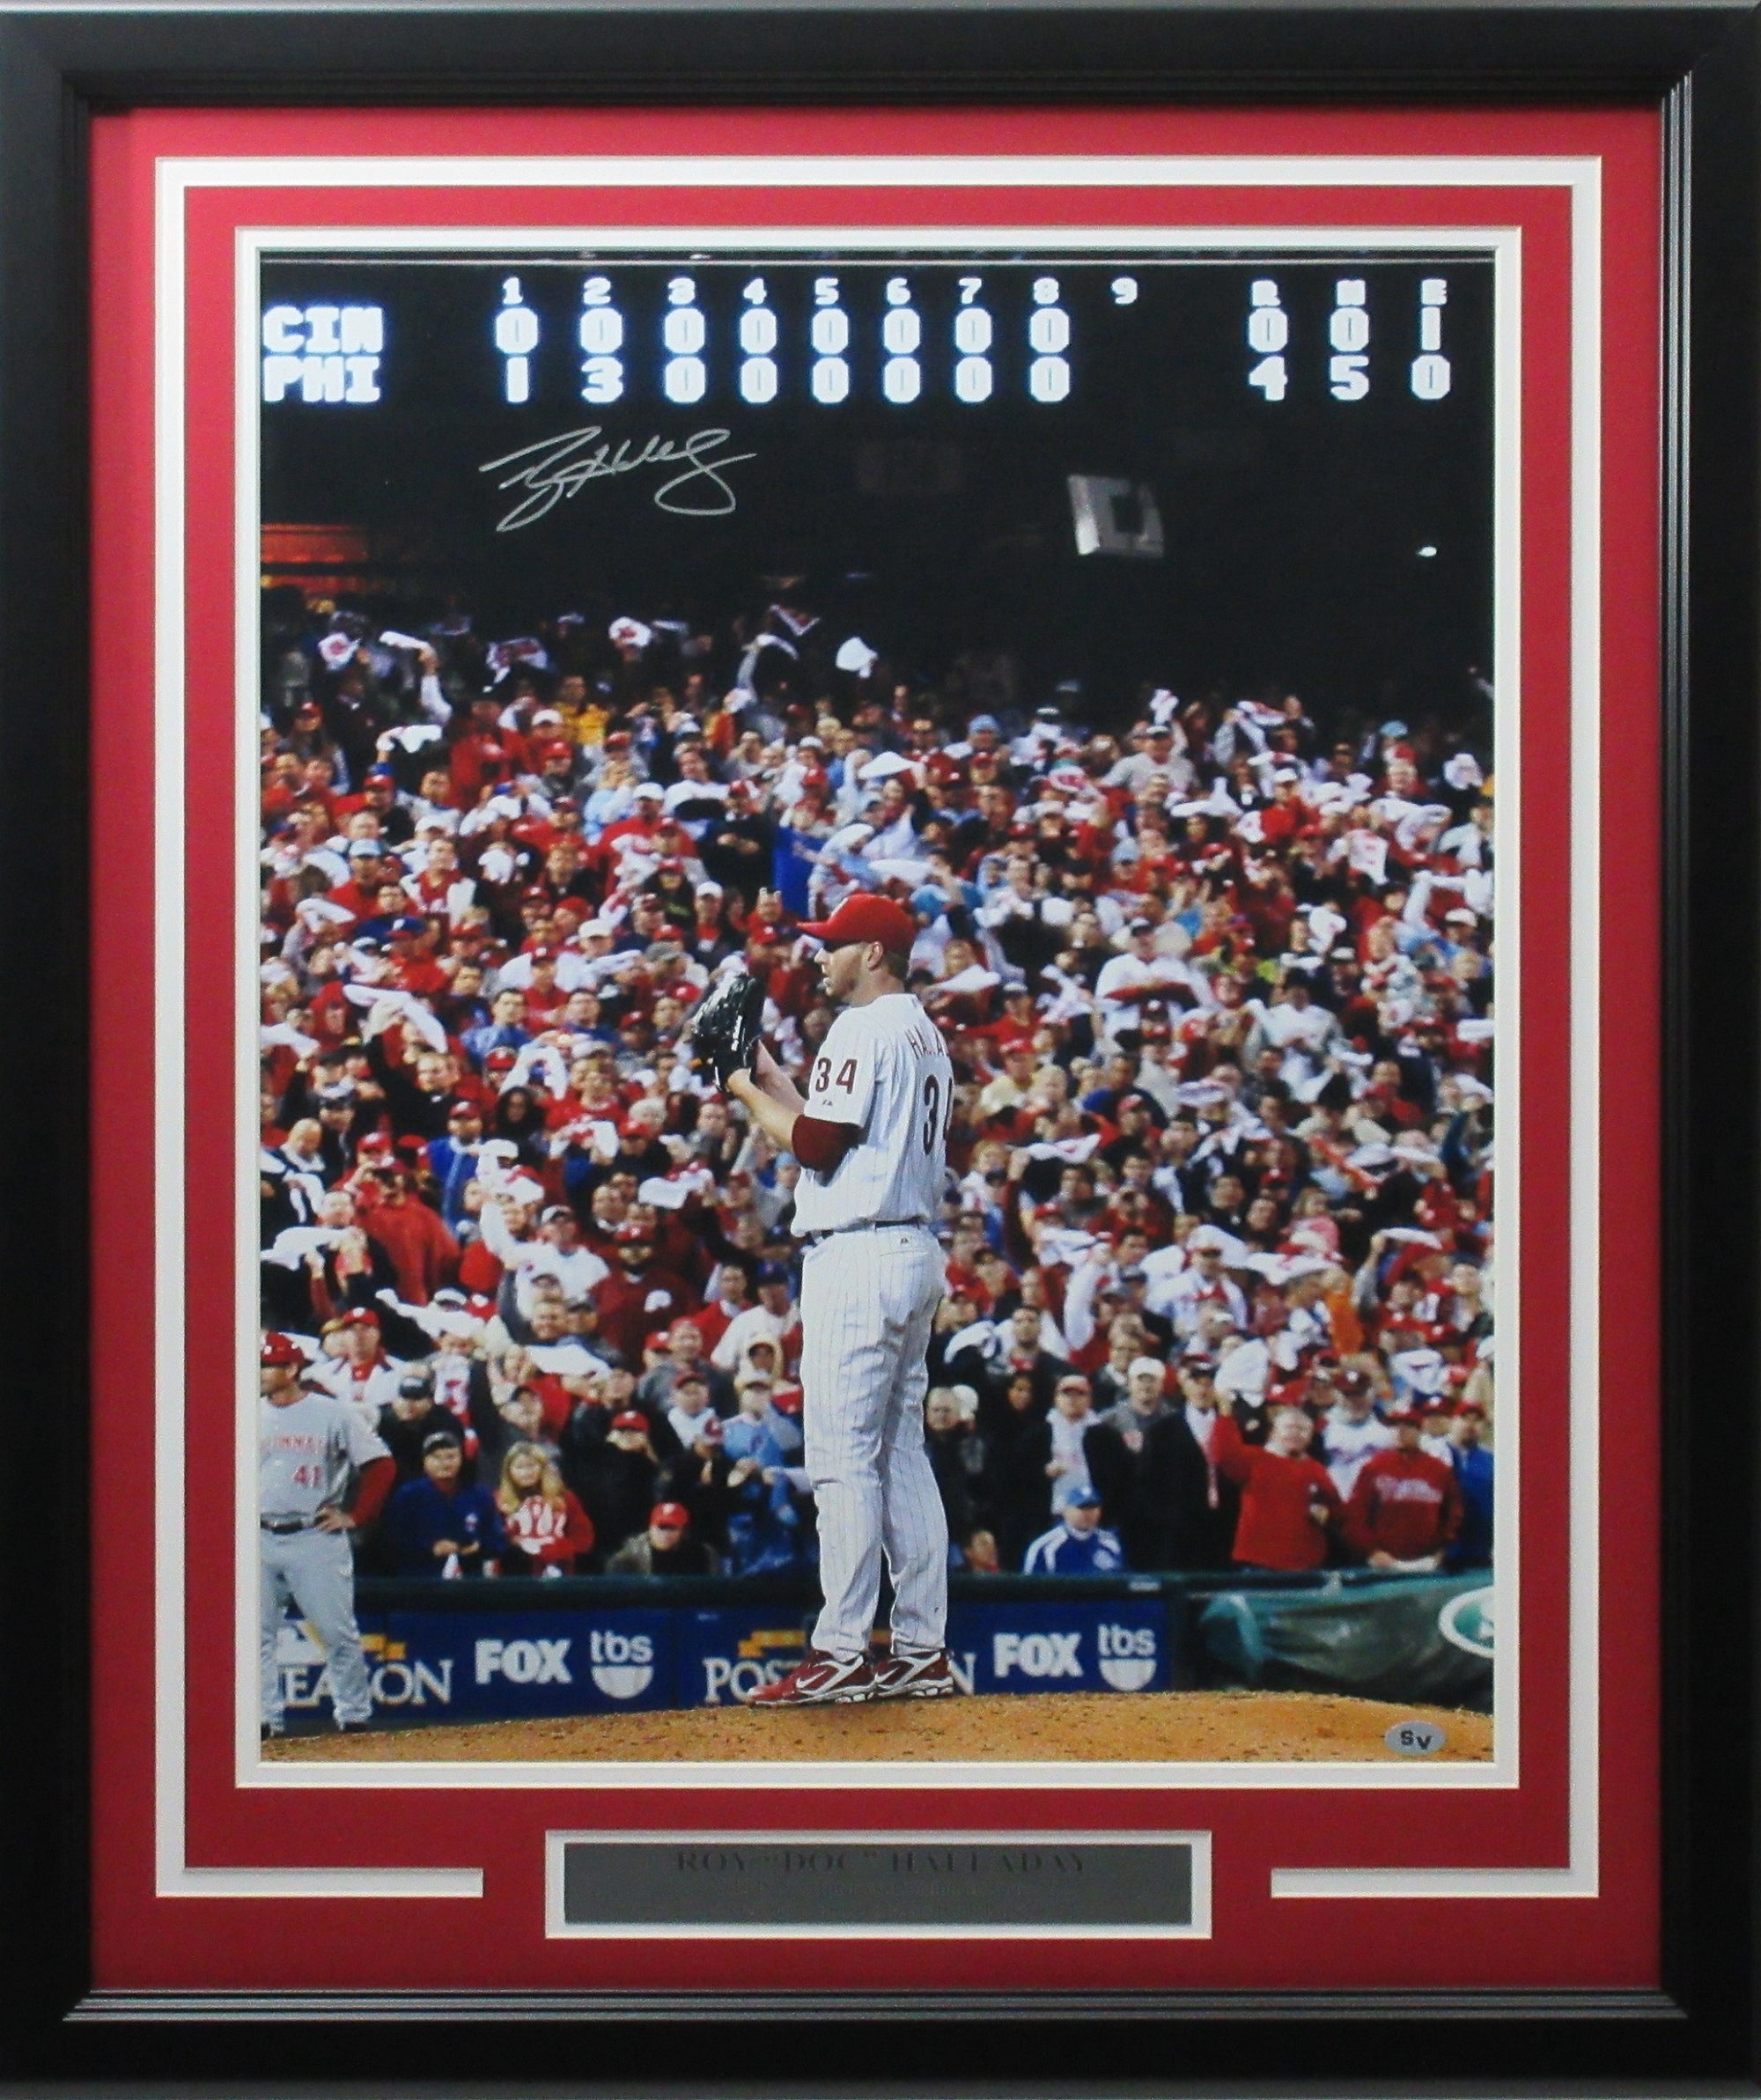 Roy Halladay 16x20 Autographed 2010 NLDS No Hitter photo framed